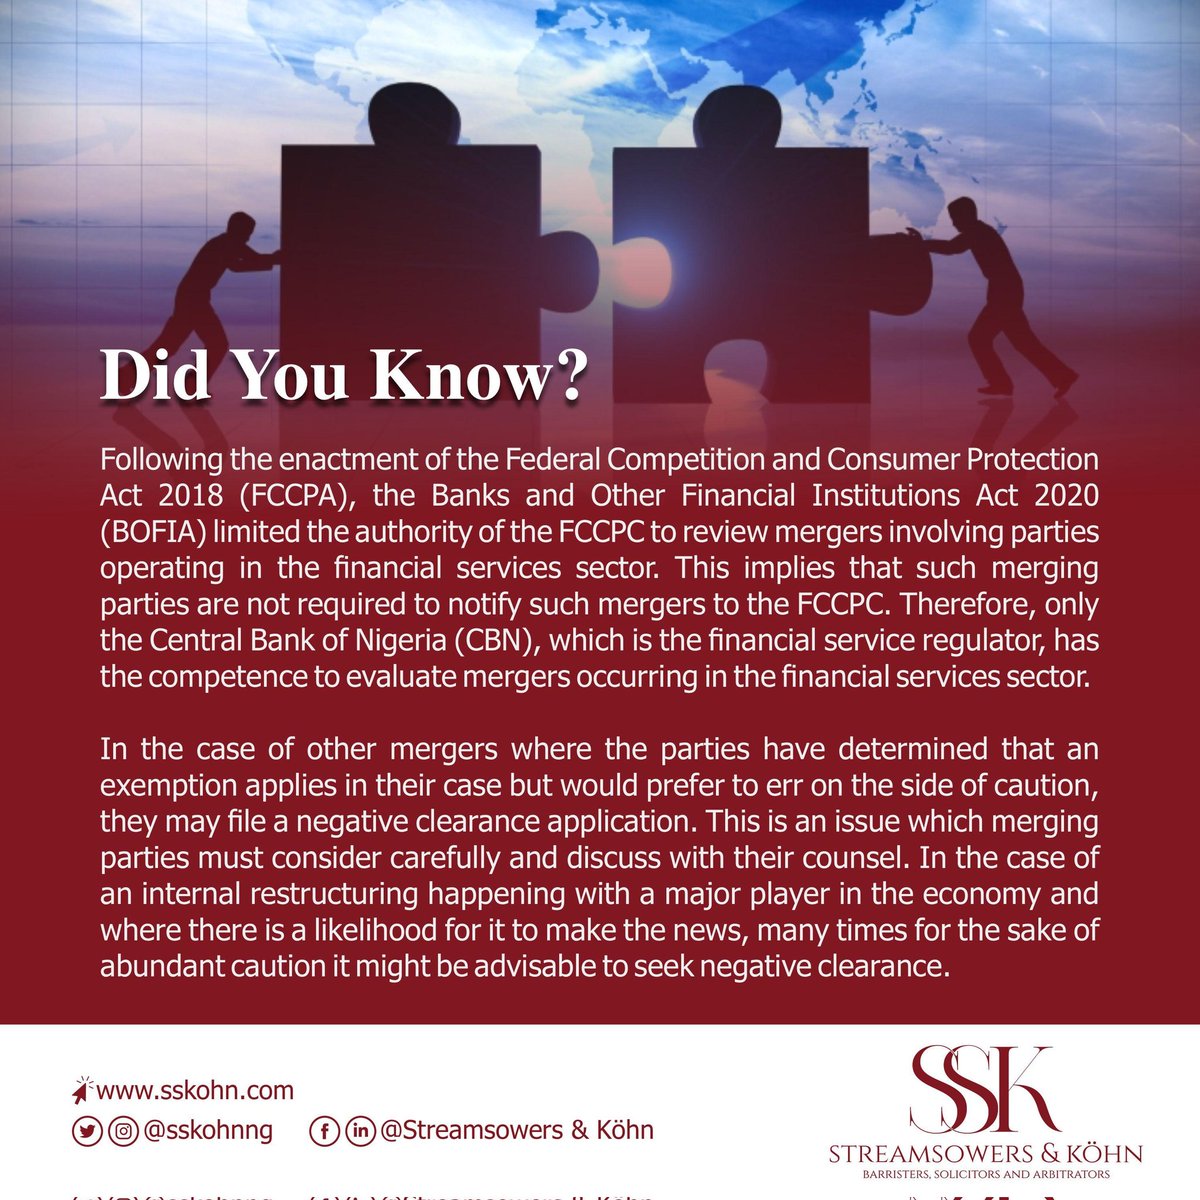 For more information, you may contact us by email at info@sskohn.com. 

#Mergers #Acquisitions #CompetitionLaw #JointVenture #Businesscombinations #Startups #Antitrust #Mergerreview #Mergerassessment #Compliance #Business #FCCPC  #WeAreSSK